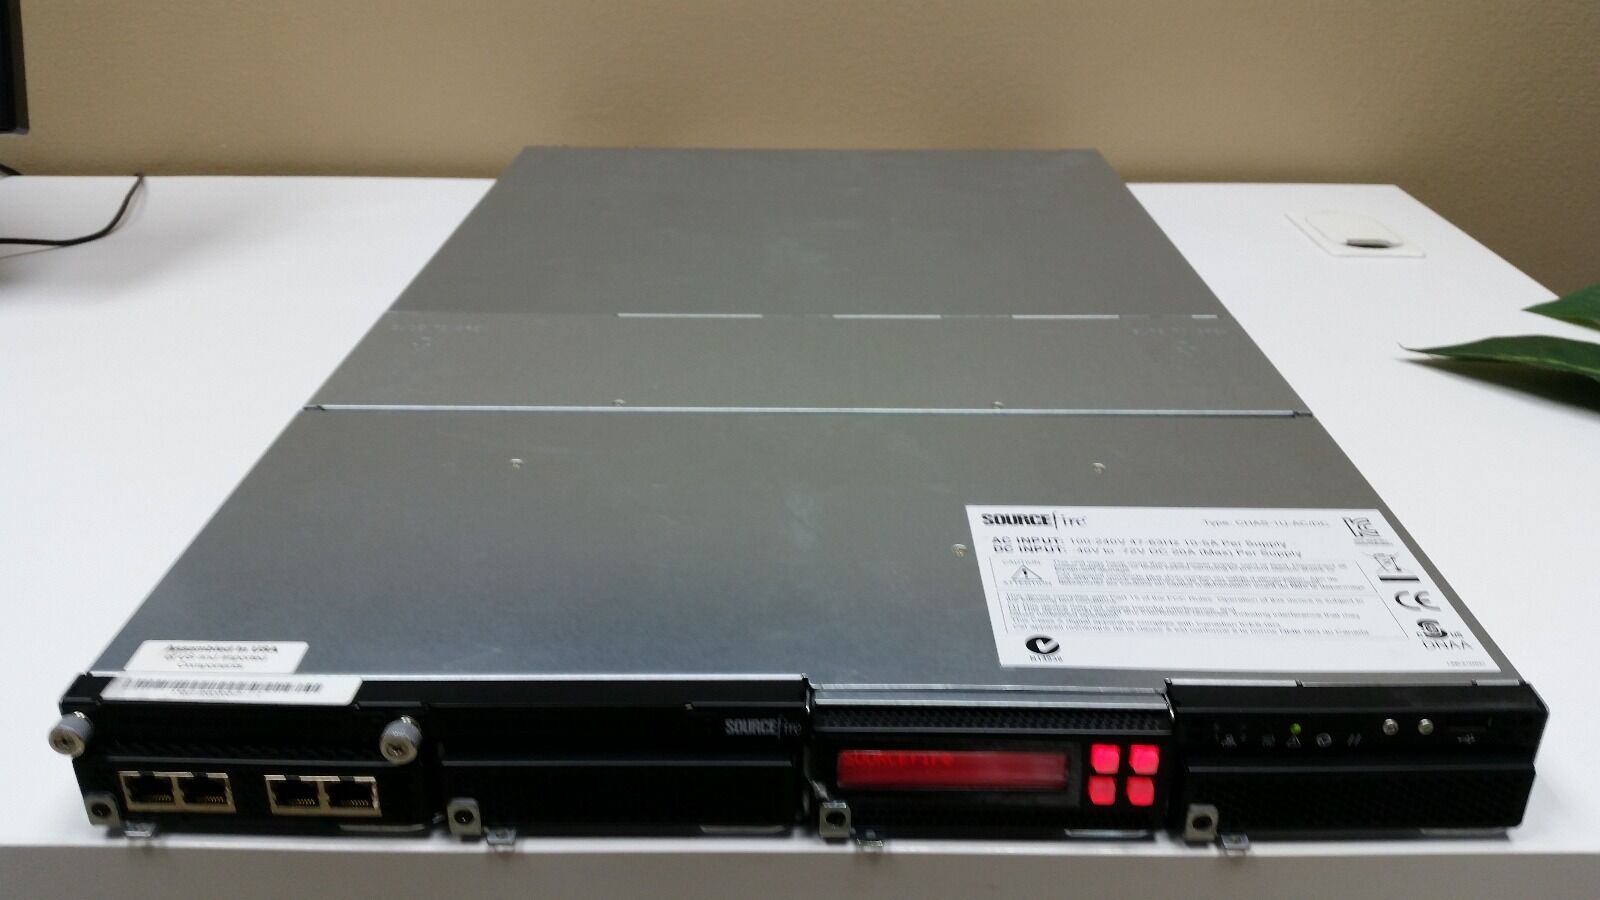 SOURCEFIRE 3D8120 IPS INTRUSION PREVENTION SYSTEM 4 PORT GB MODULE MSRP $65,488